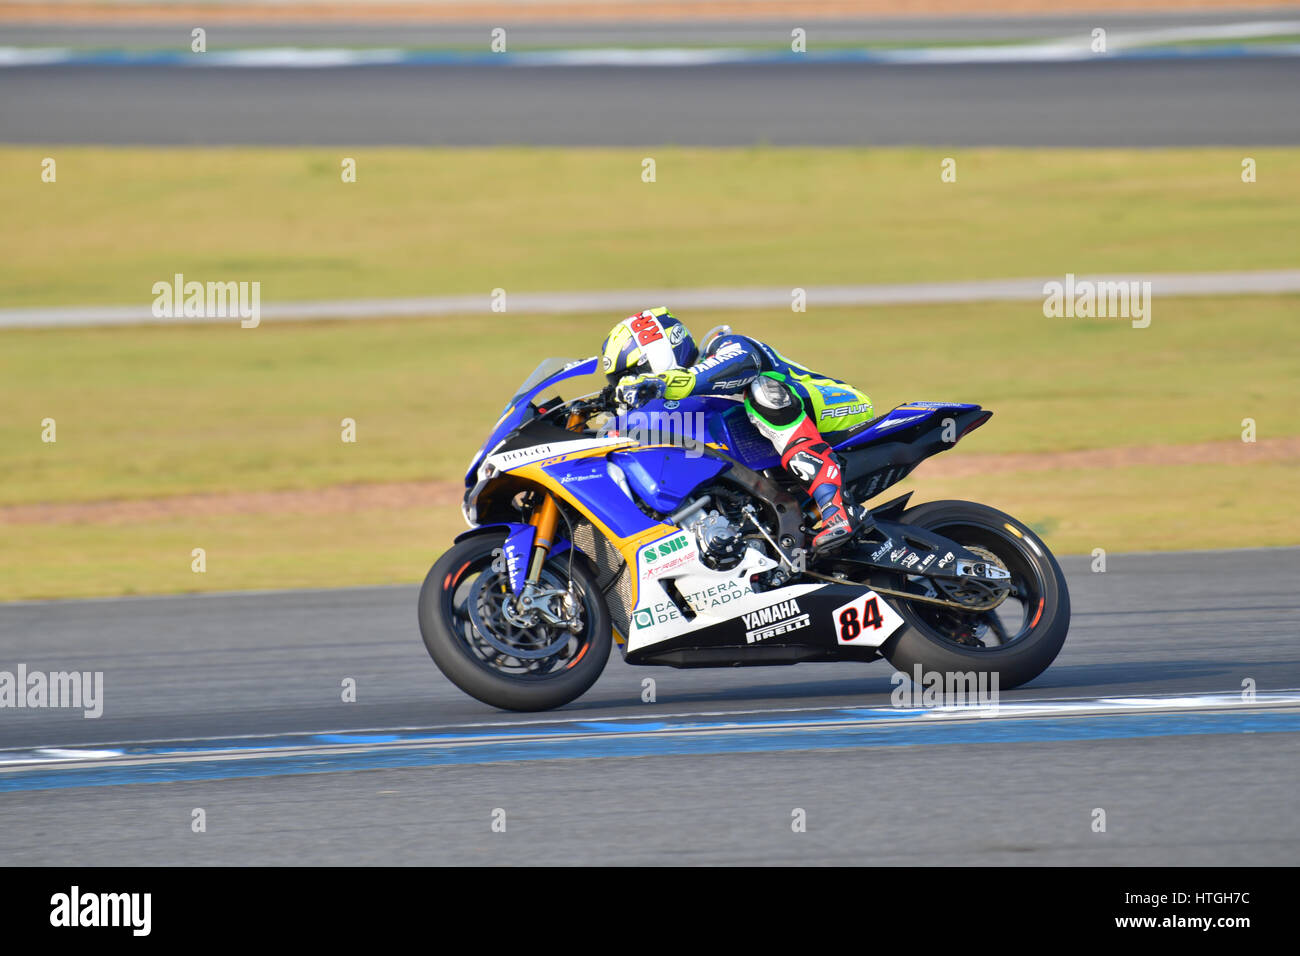 Buriram, Thailand. 11th Mar, 2017. Riccardo Russo #84 of Italy with Yamaha YZF R1 in FIM Superbike World Championship (SBK) at Chang International Circuit on March 11, 2017 in Buriram Thailand. Credit: Chatchai Somwat/Alamy Live News Stock Photo